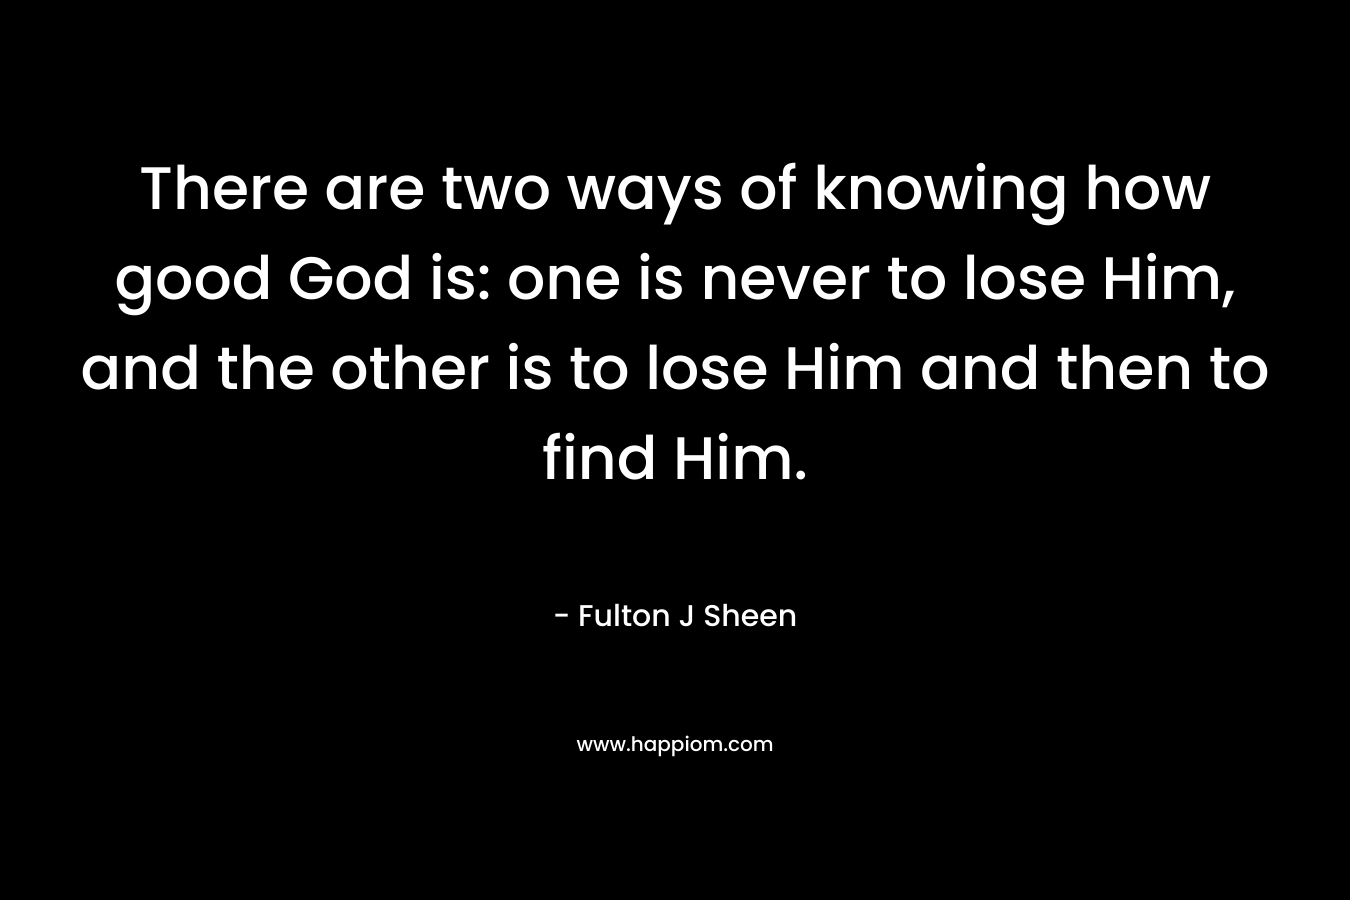 There are two ways of knowing how good God is: one is never to lose Him, and the other is to lose Him and then to find Him.